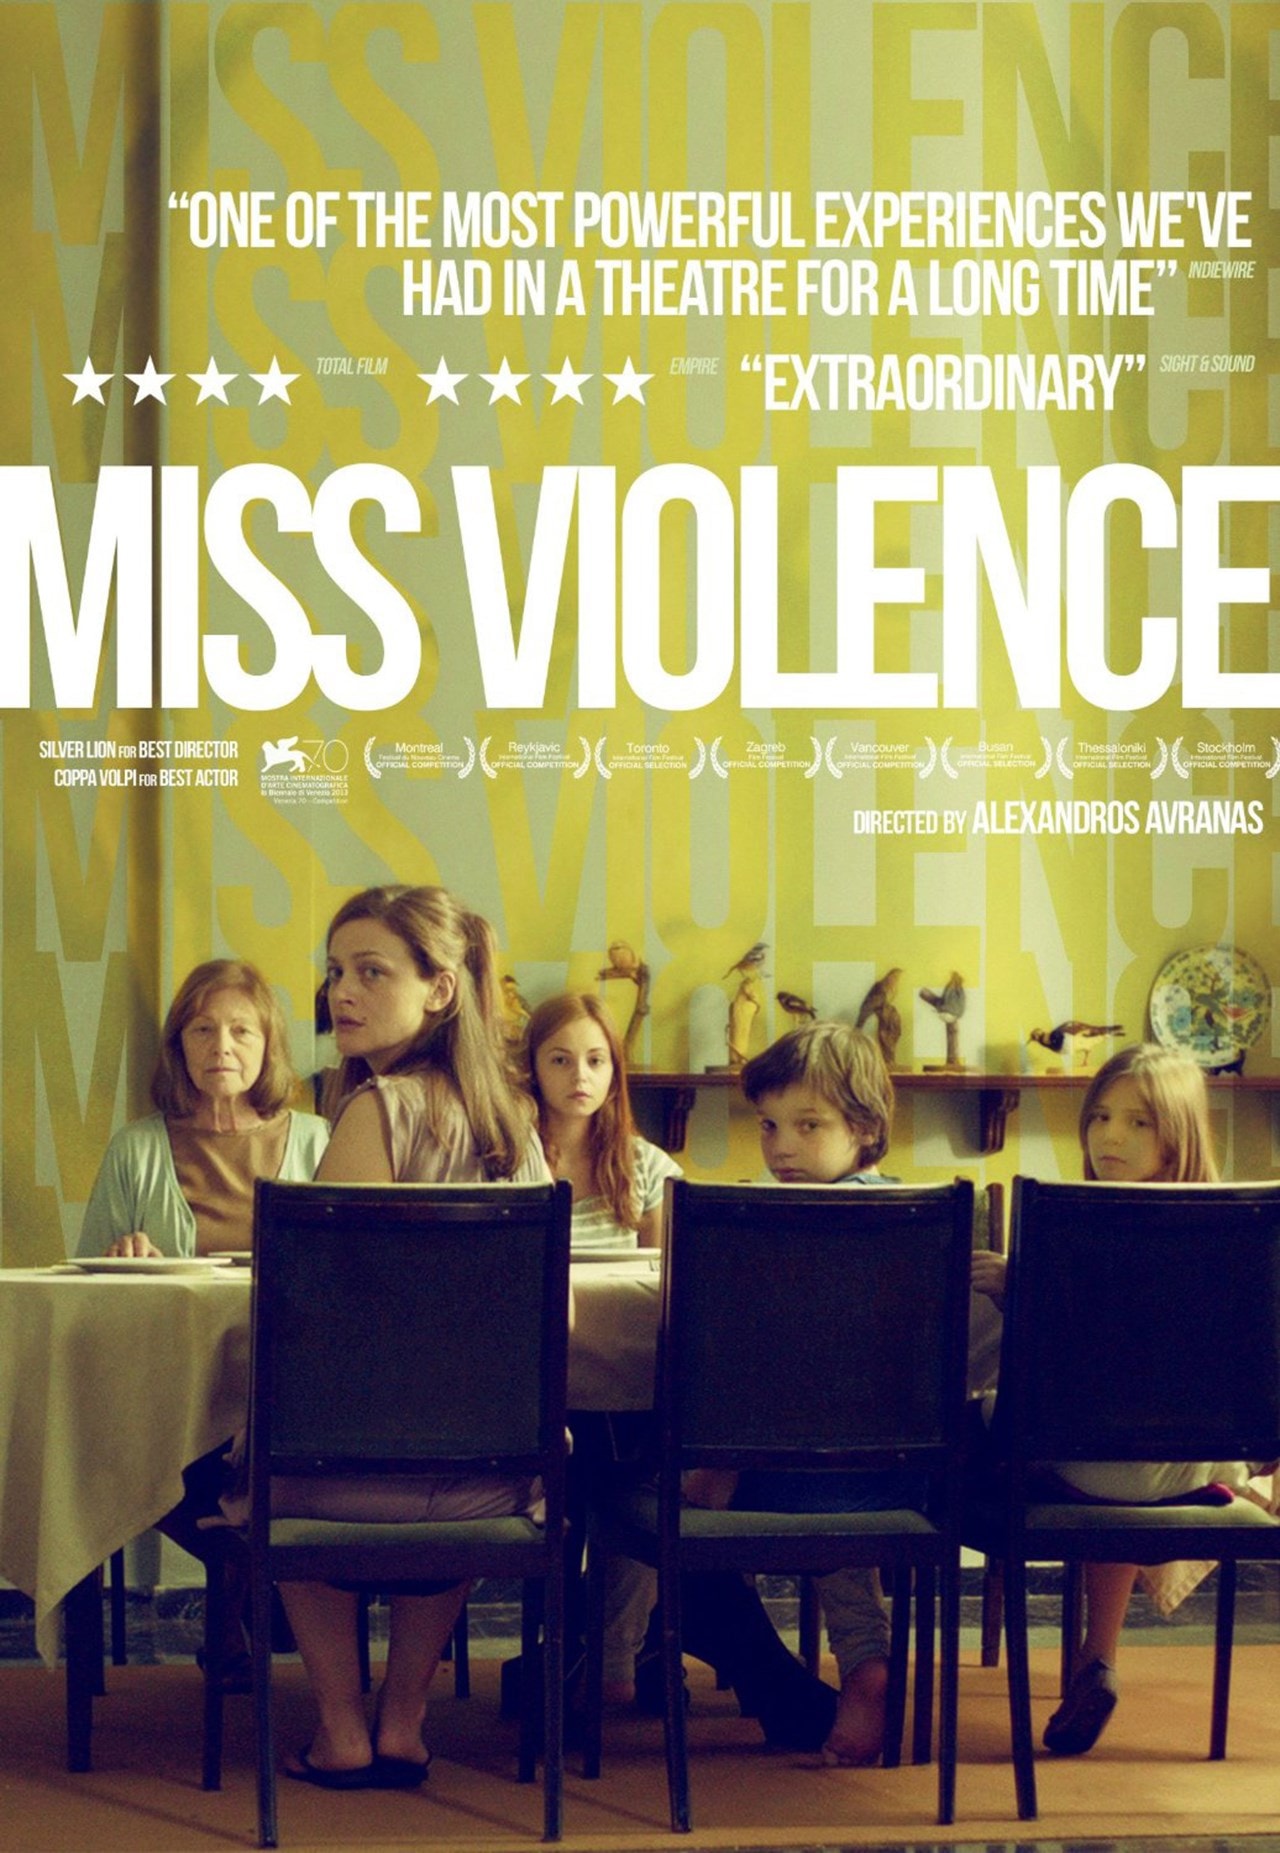 Miss Violence | DVD | Free shipping over £20 | HMV Store